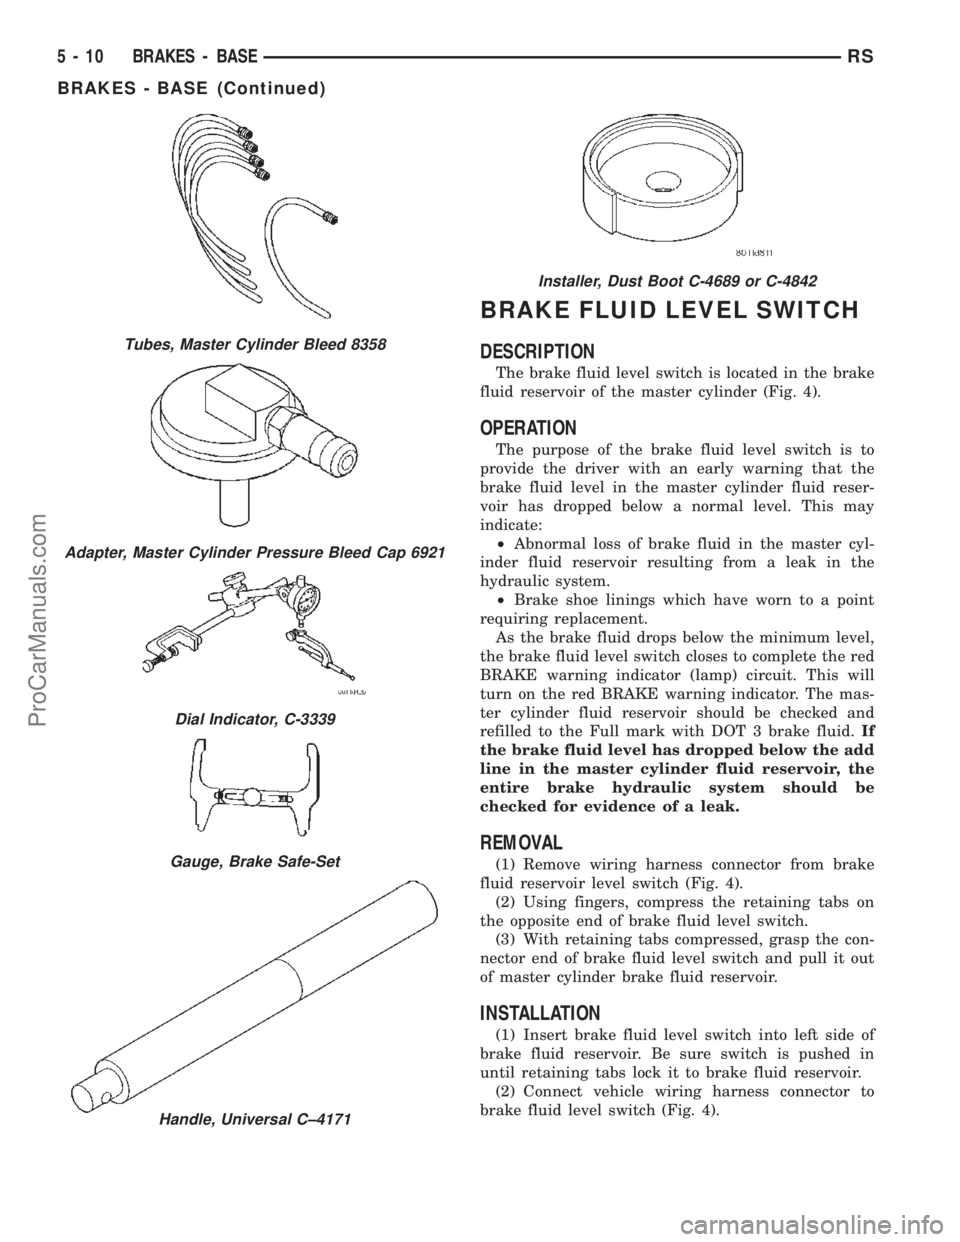 CHRYSLER TOWN AND COUNTRY 2002  Service Manual BRAKE FLUID LEVEL SWITCH
DESCRIPTION
The brake fluid level switch is located in the brake
fluid reservoir of the master cylinder (Fig. 4).
OPERATION
The purpose of the brake fluid level switch is to
p